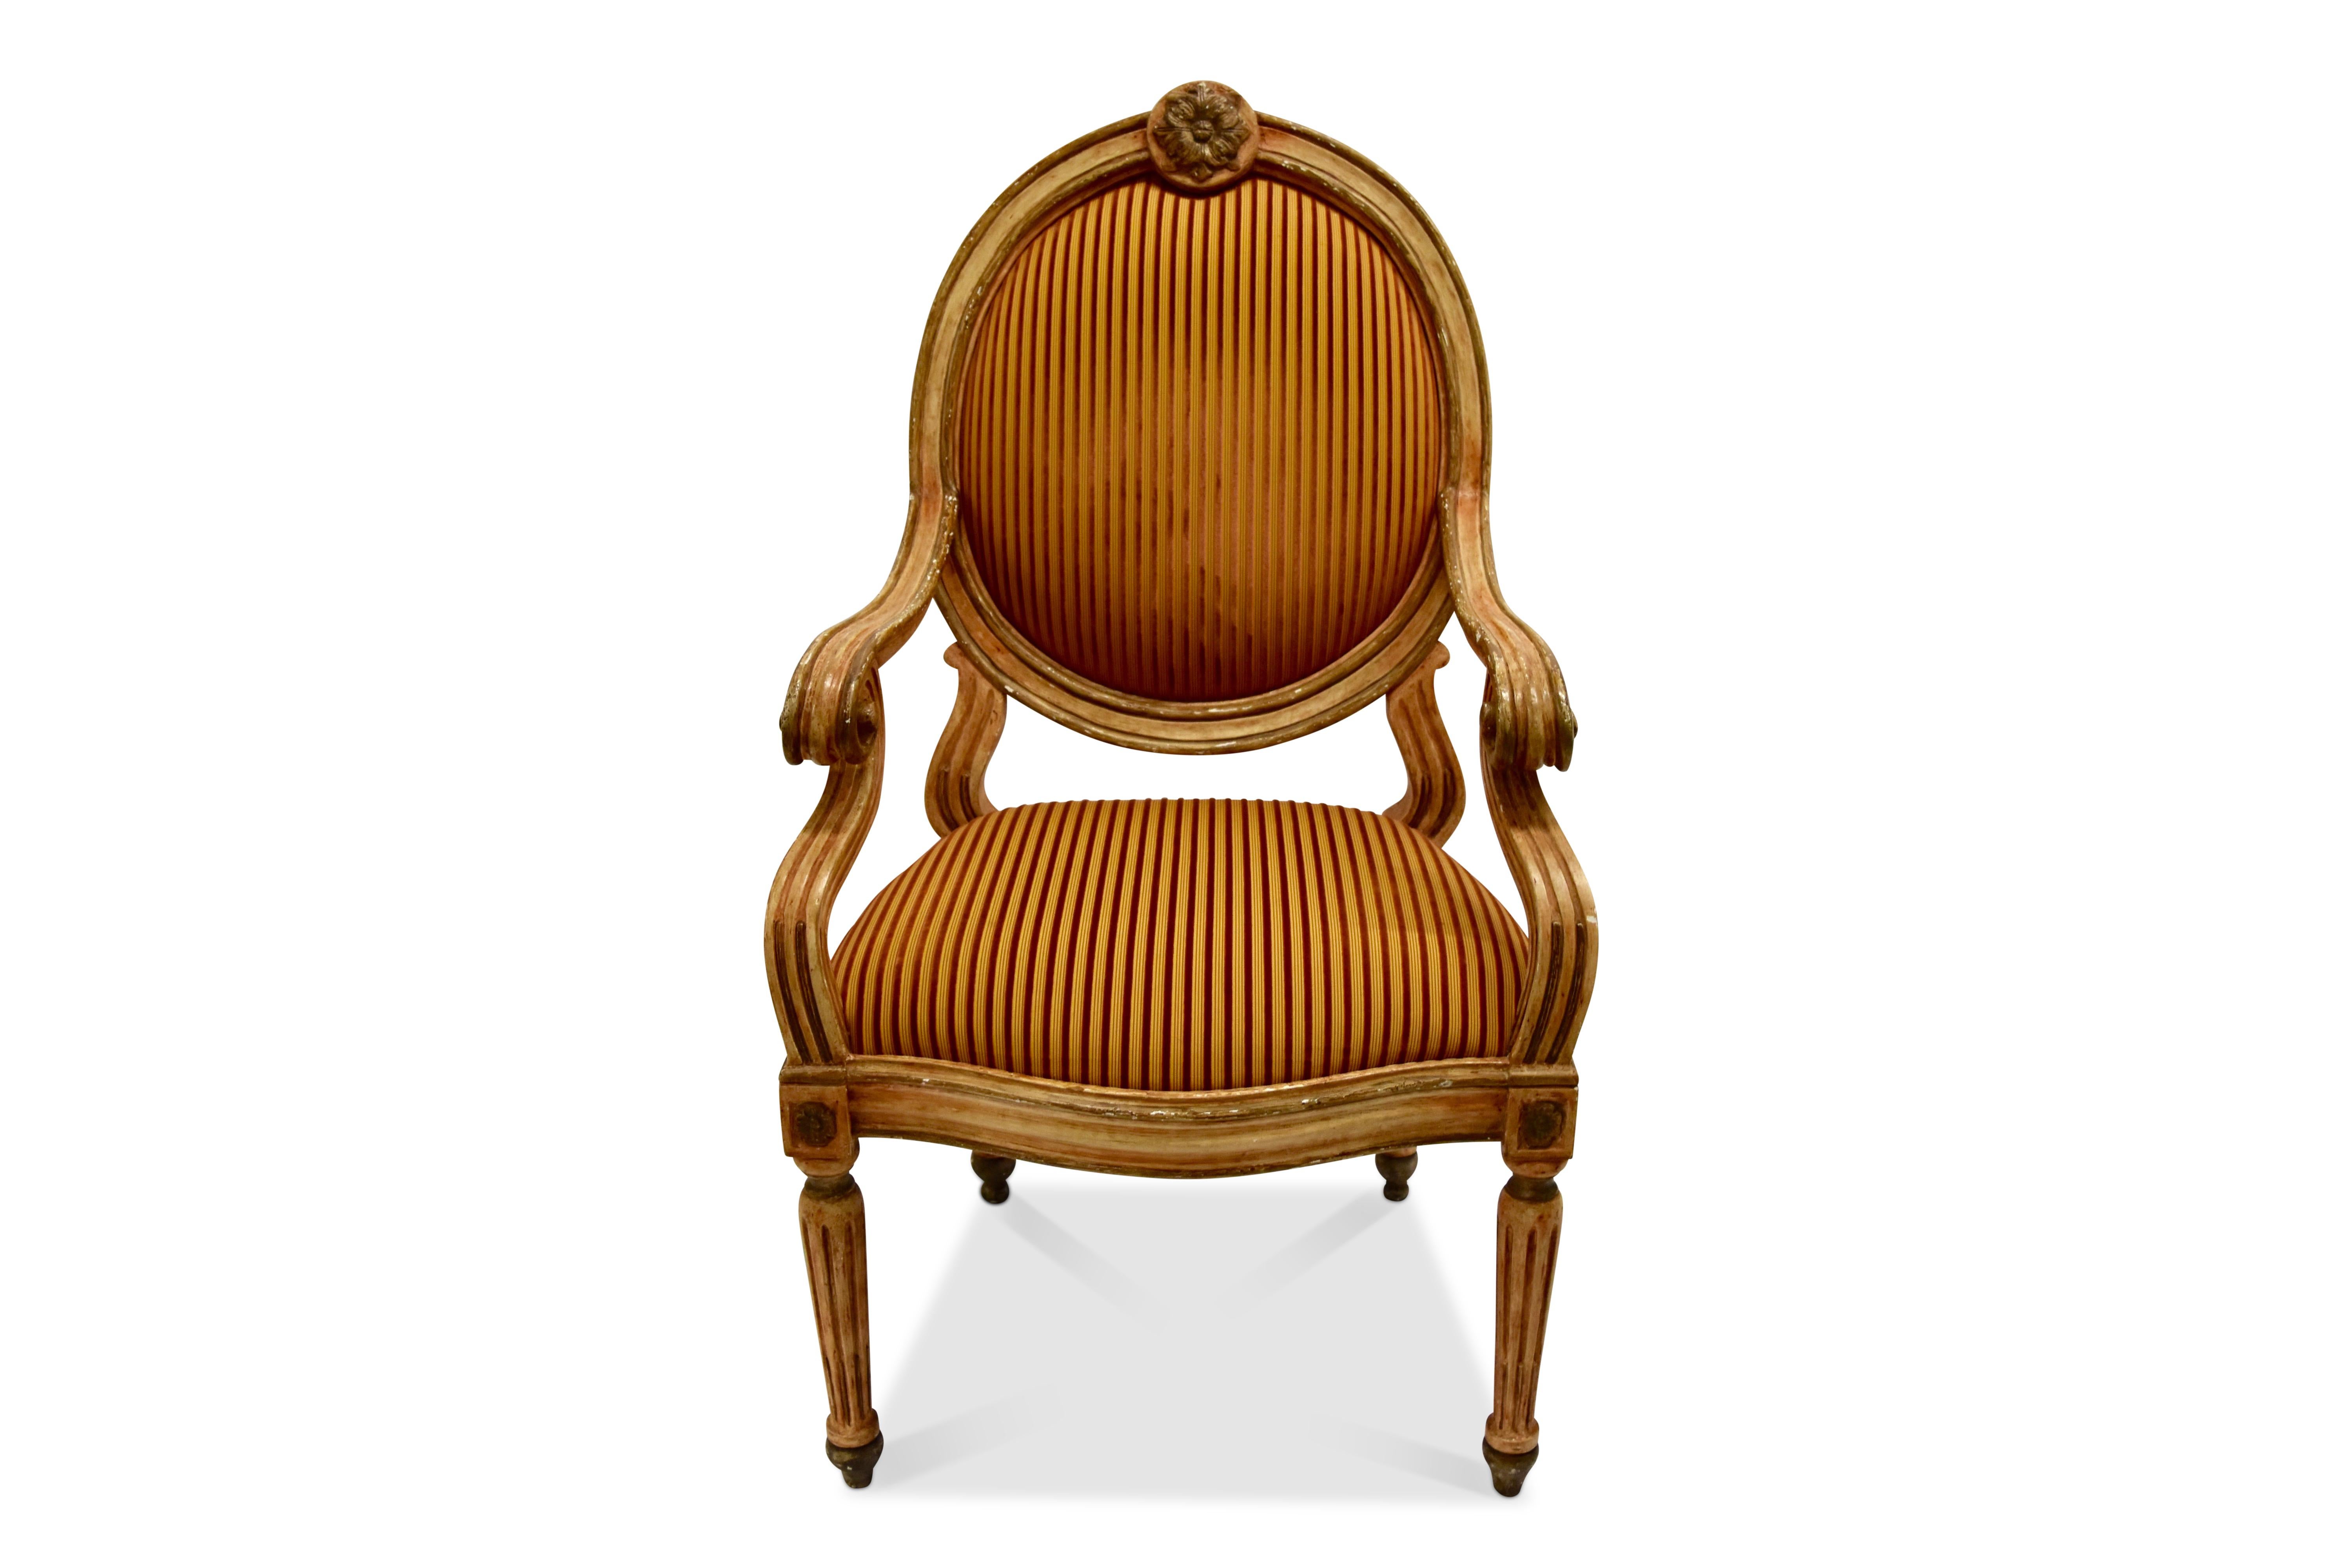 Each with a painted and gilded frame, having an oval upholstered inset back, fluted arms resting on a similarly fluted rail seat with an upholstered inset, all on turned fluted legs.